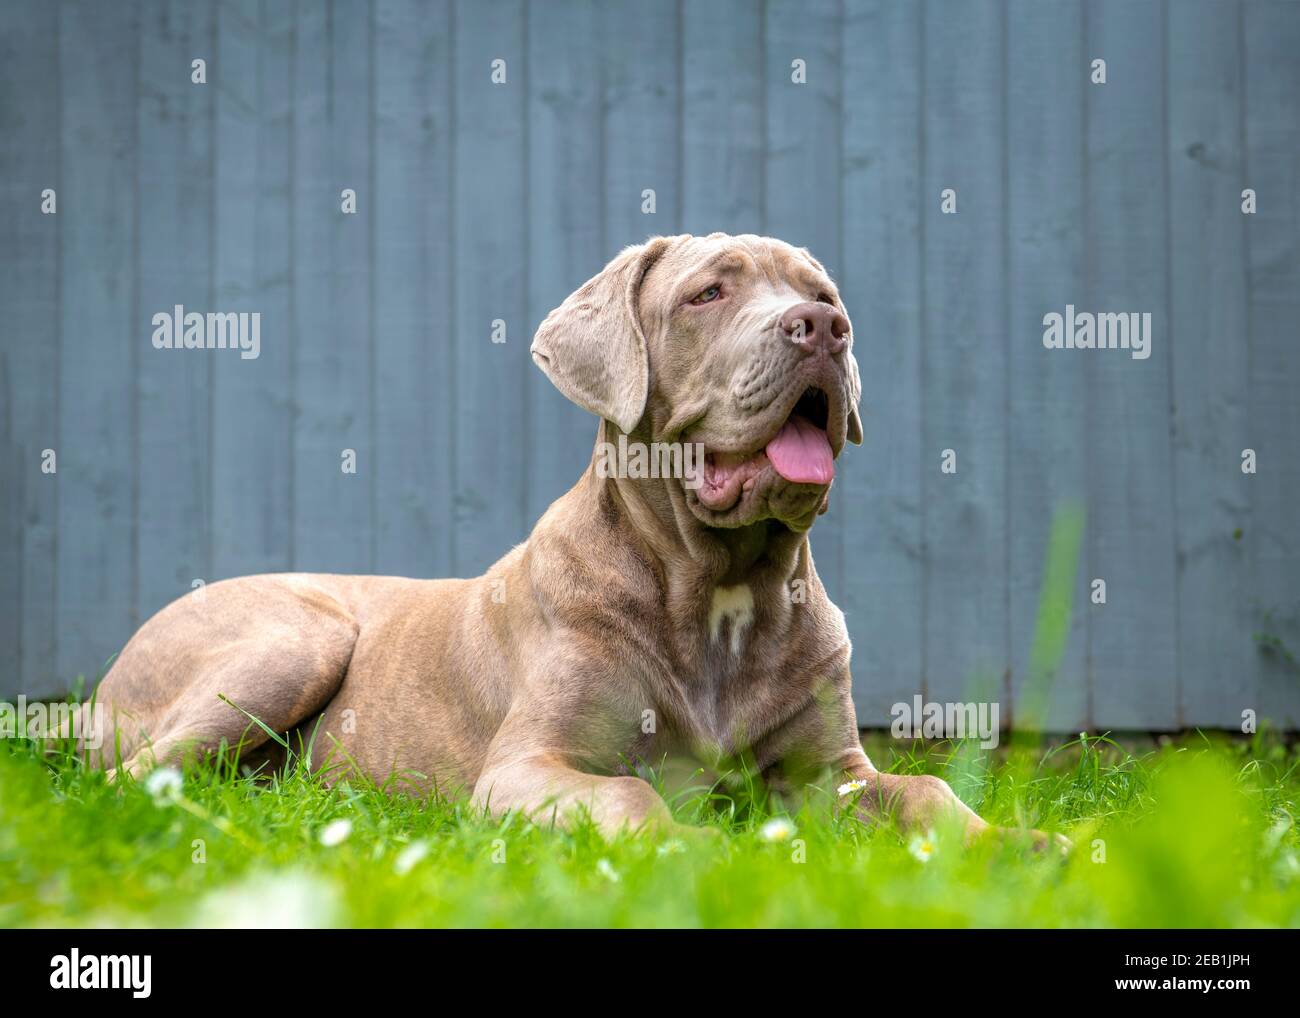 Large family pet, stunning dog lying on the grass looking very content and loving copy space on the plain background Stock Photo